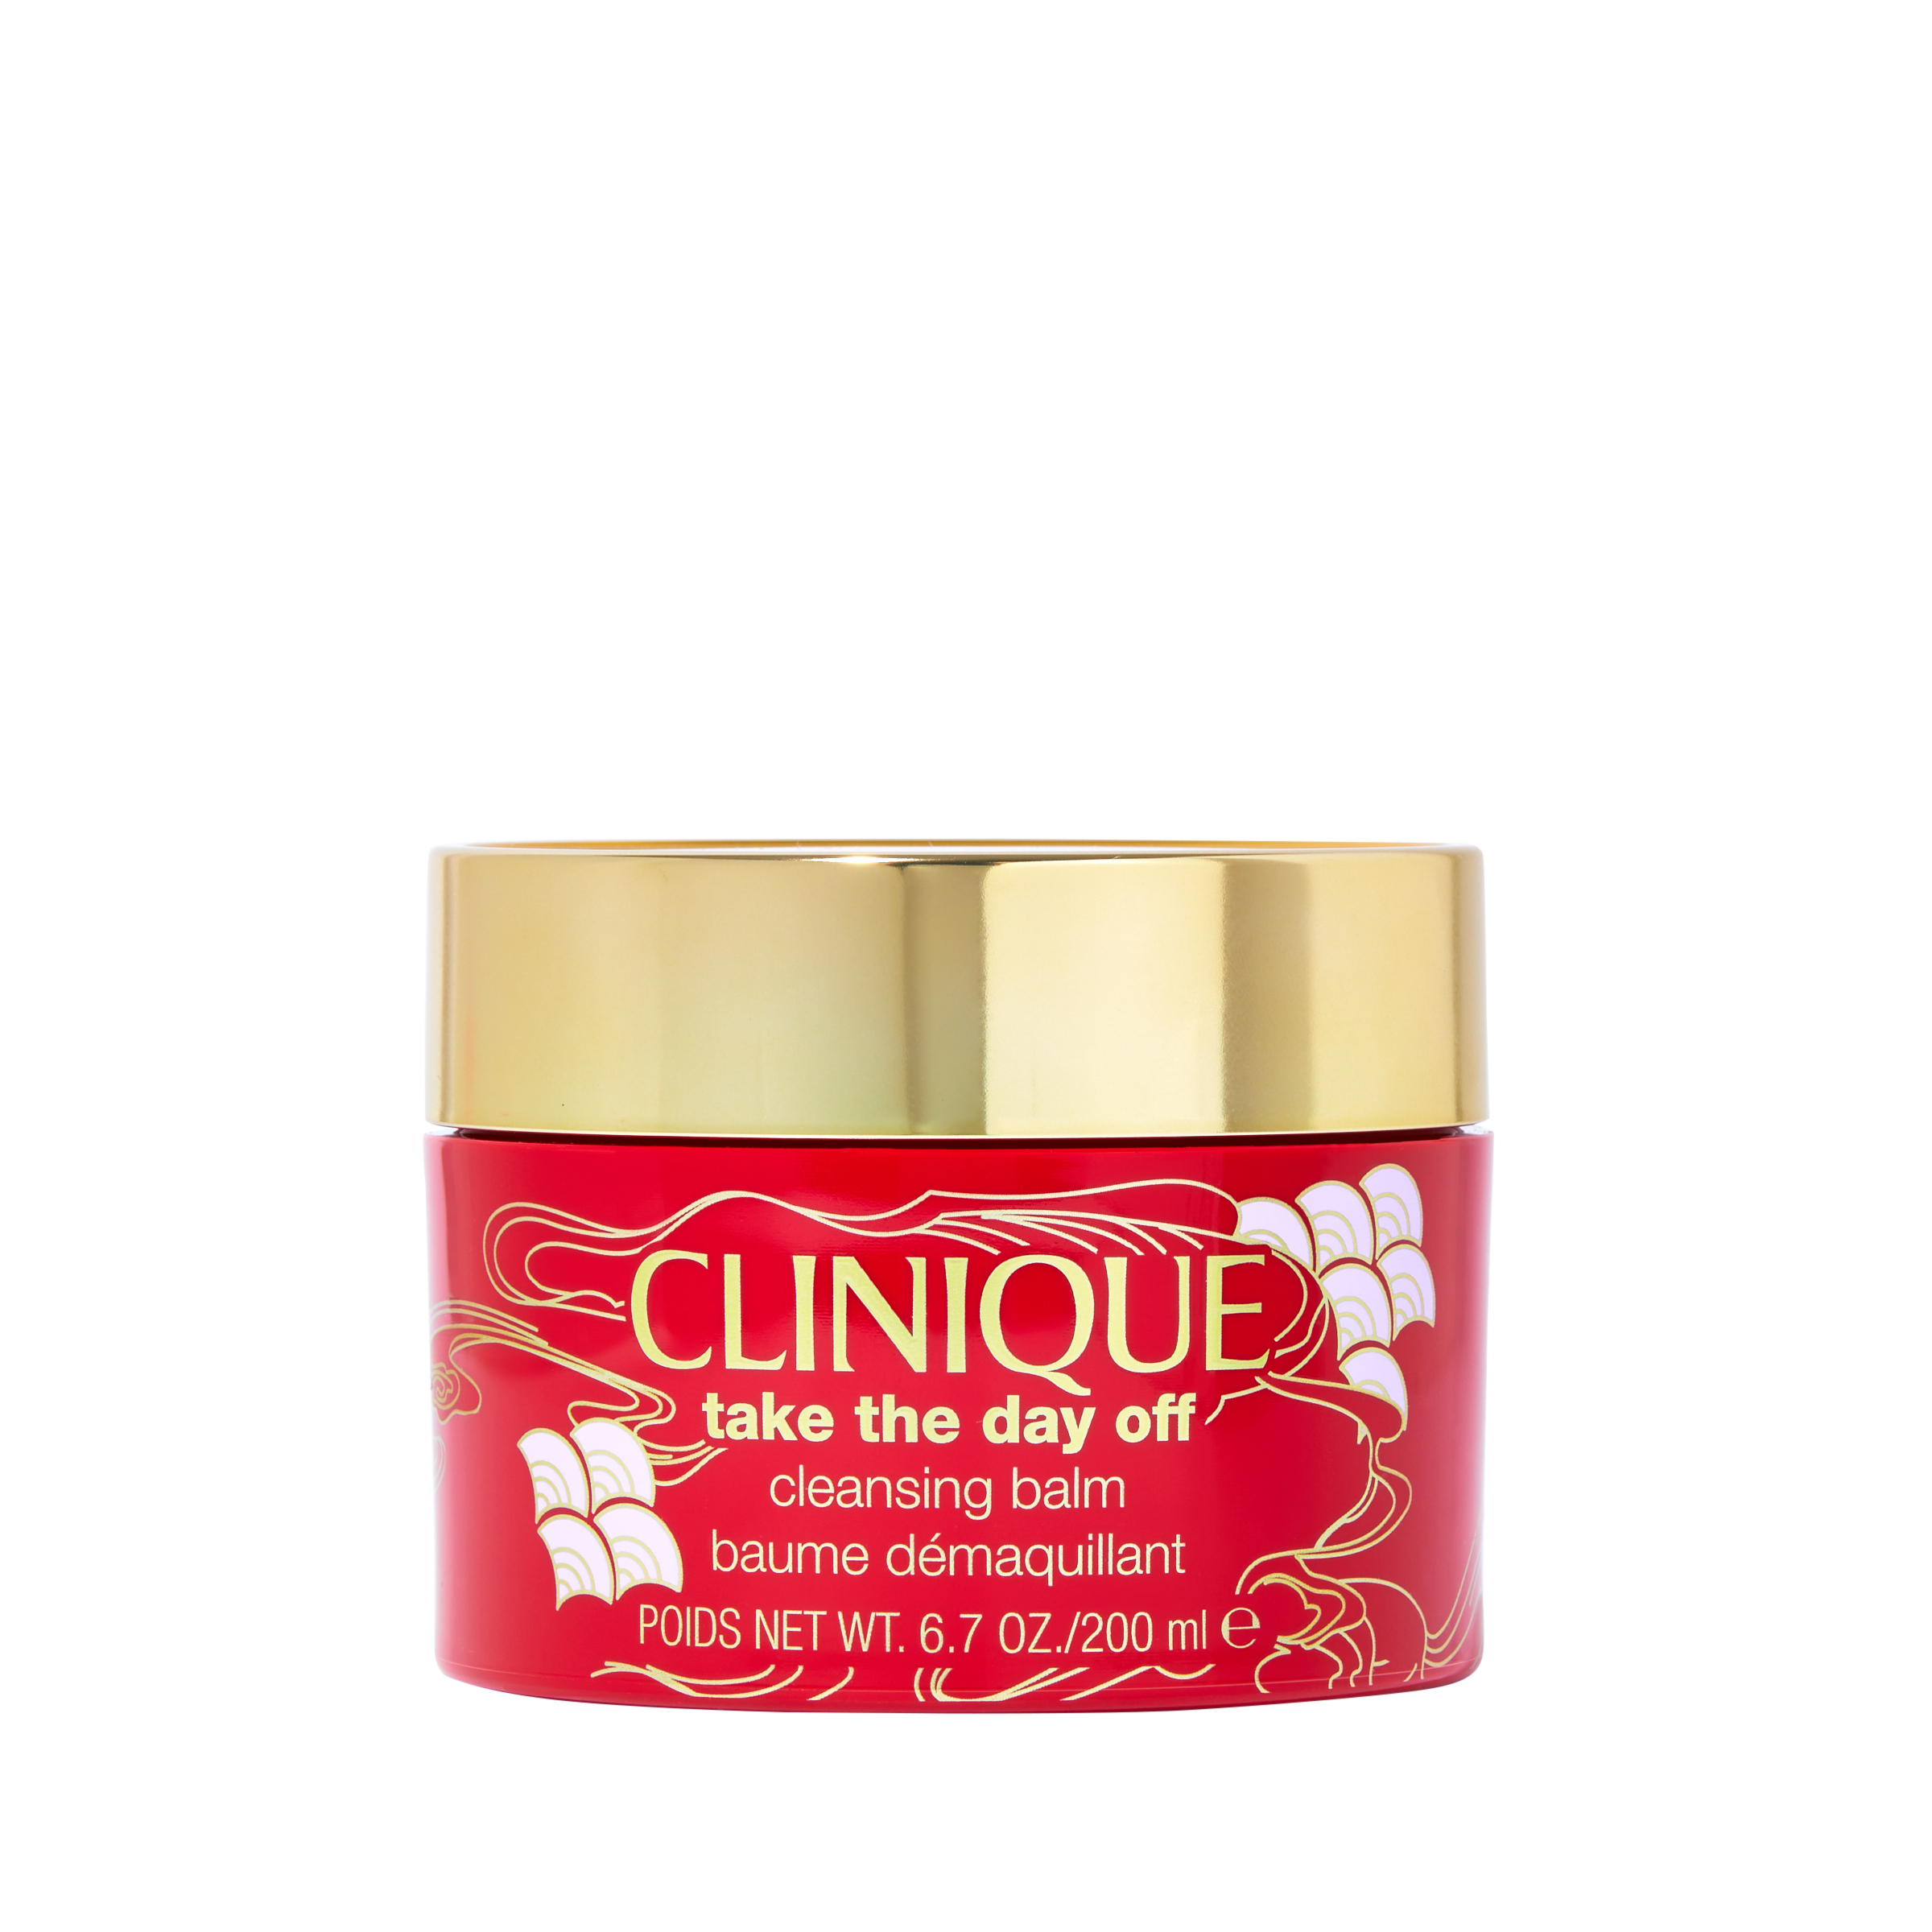 Lunar New Take the Day Off™ Cleansing Balm